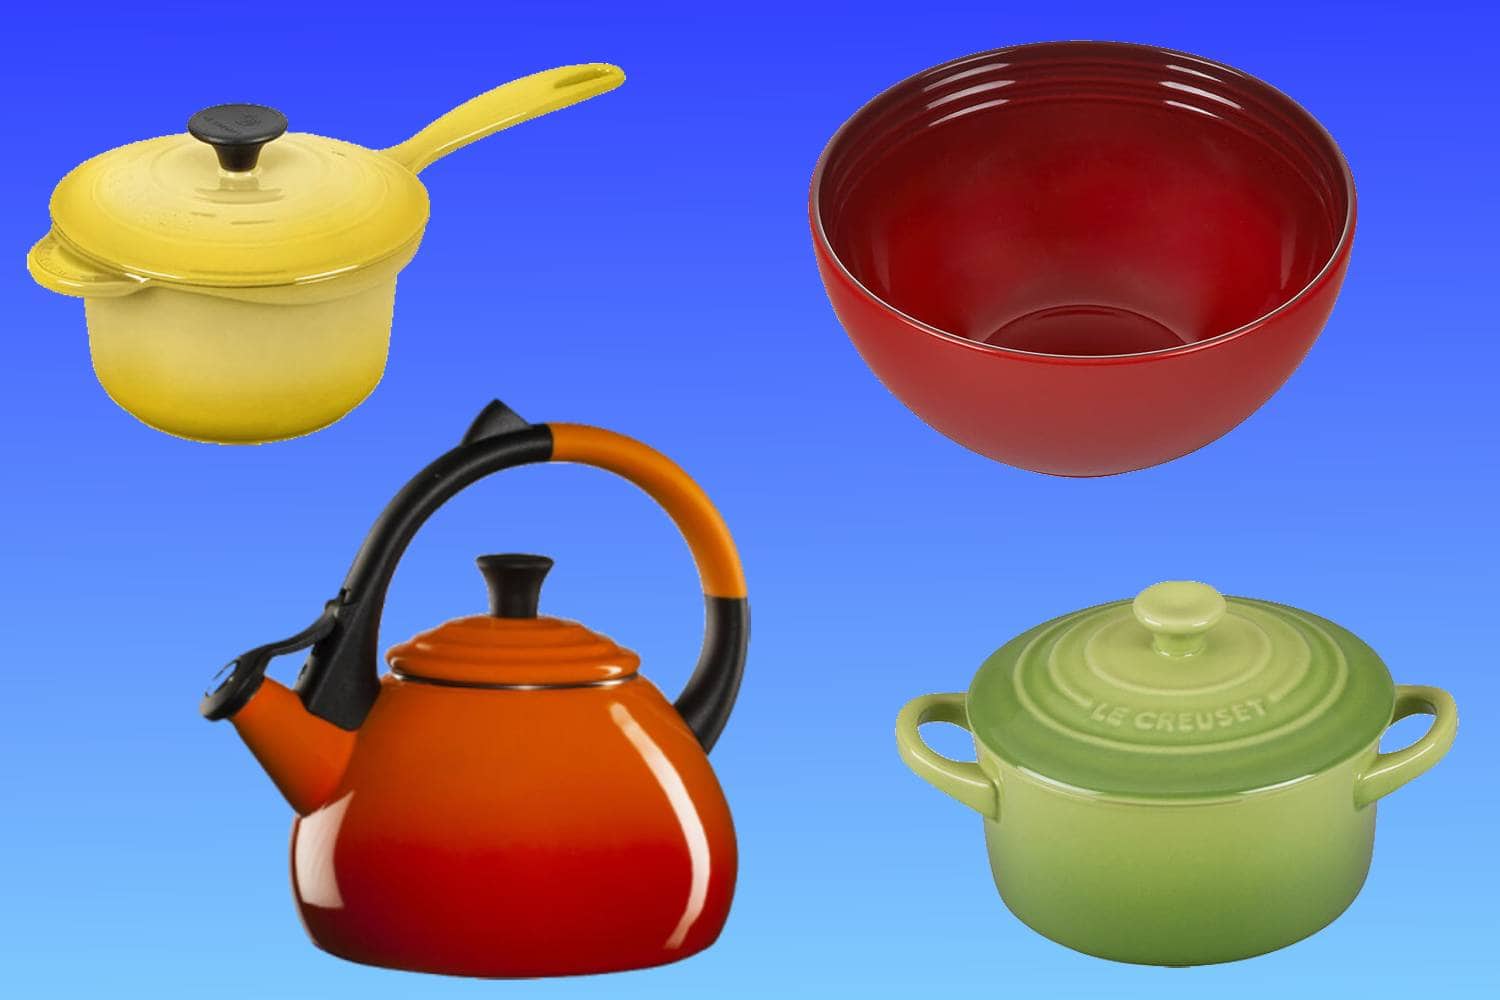 15 of Items From the Creuset Sale Let's Eat Cake